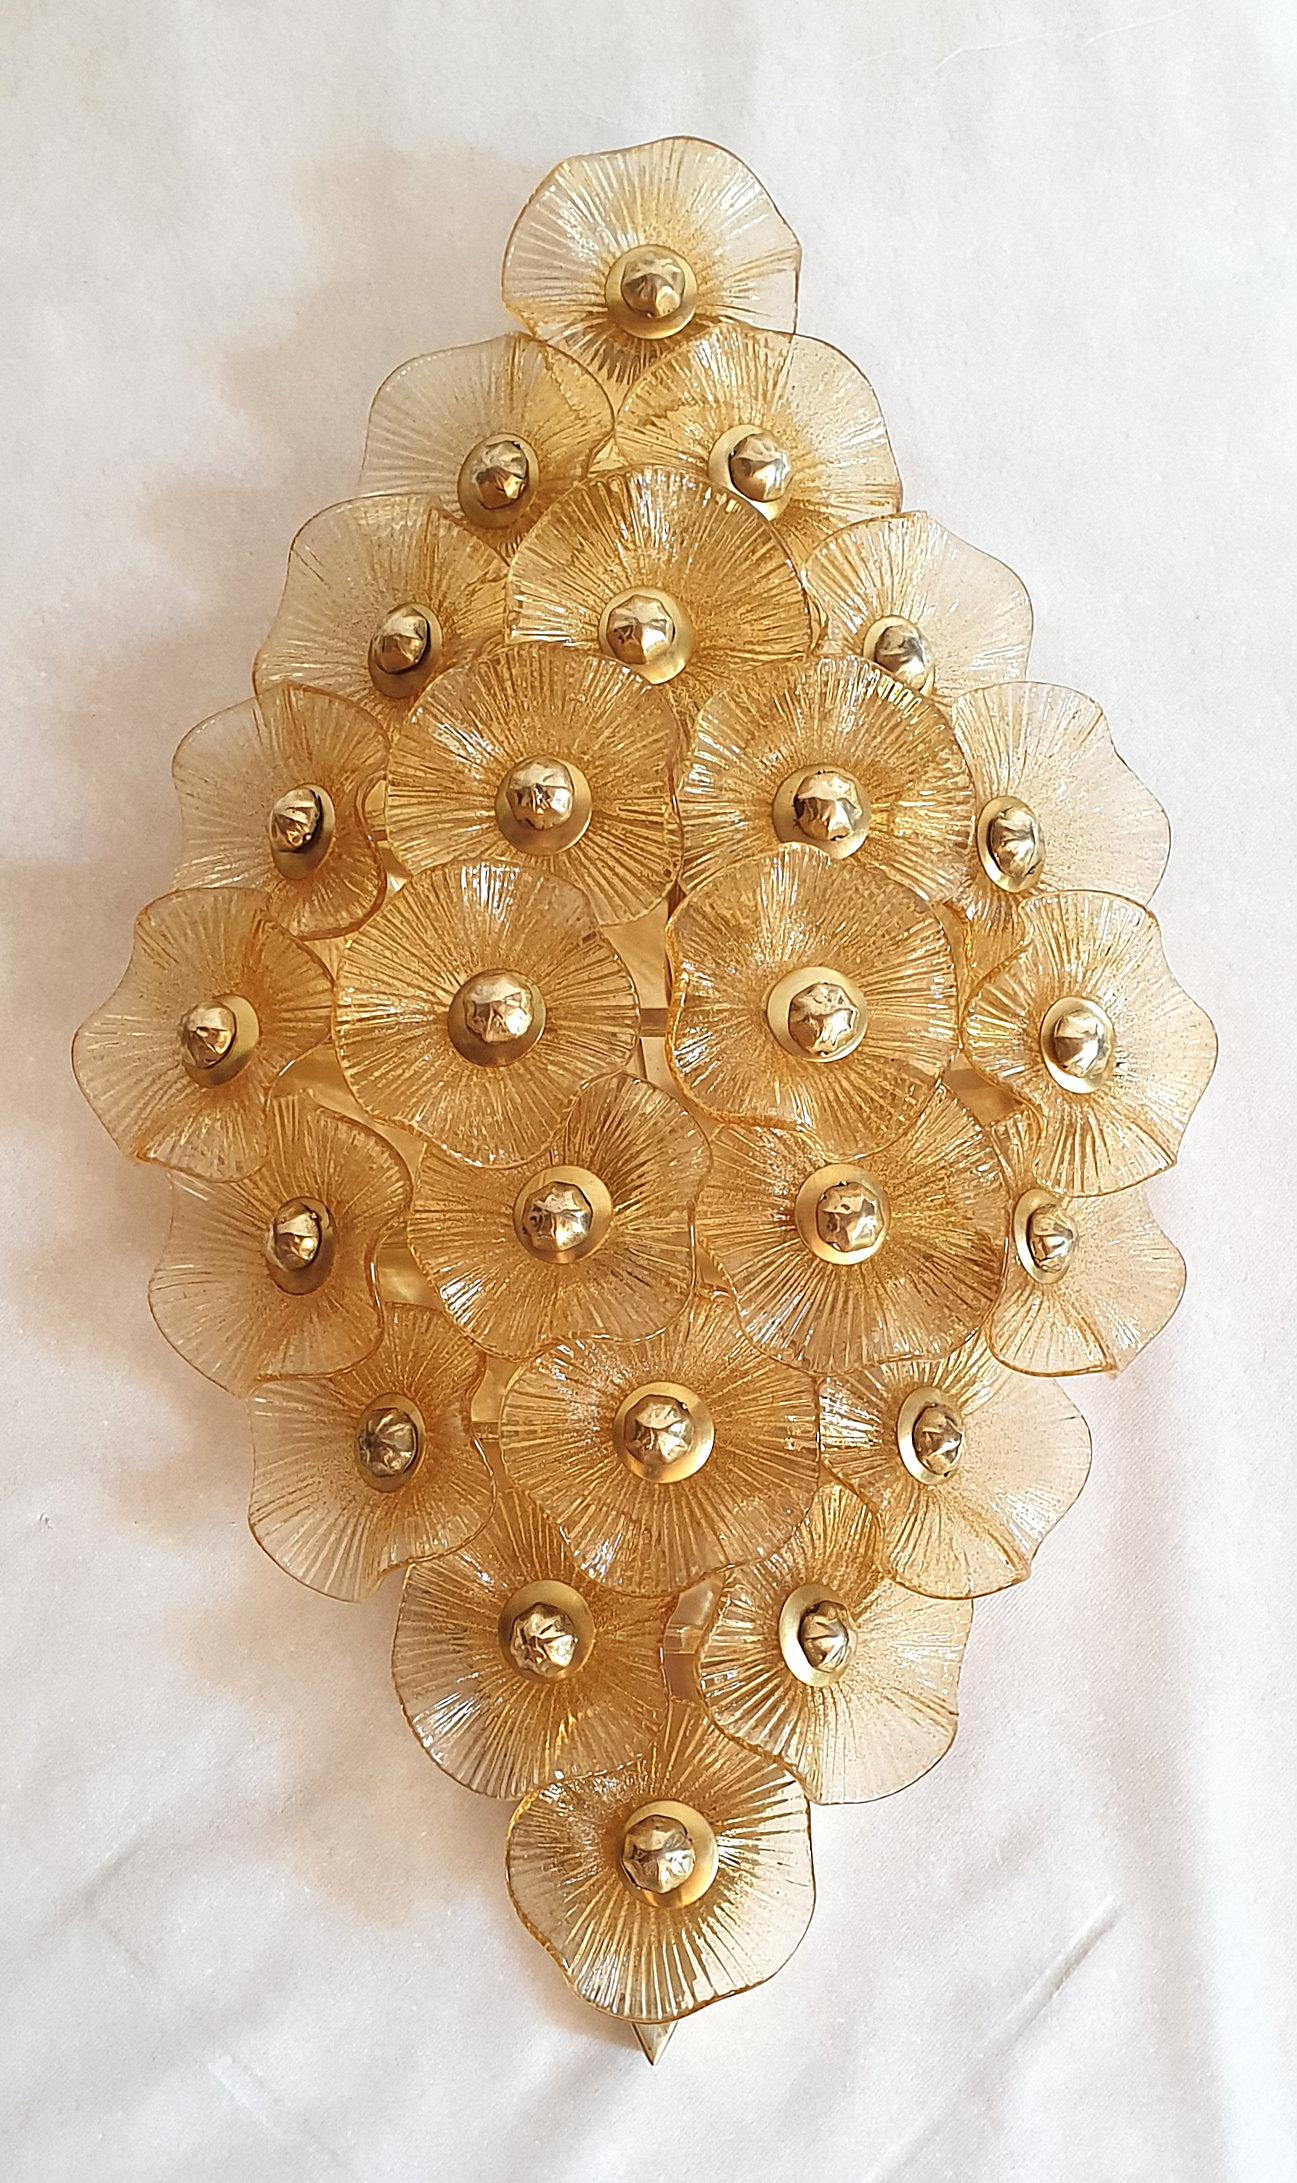 Pair of large diamond shape brass and Murano glass flowers, Mid-Century Modern sconces or flush mounts, attributed to Venini, 1970s.
Each Murano glass beige flower is fixed individually with a brass button.
Polished brass frame, with 2 lights